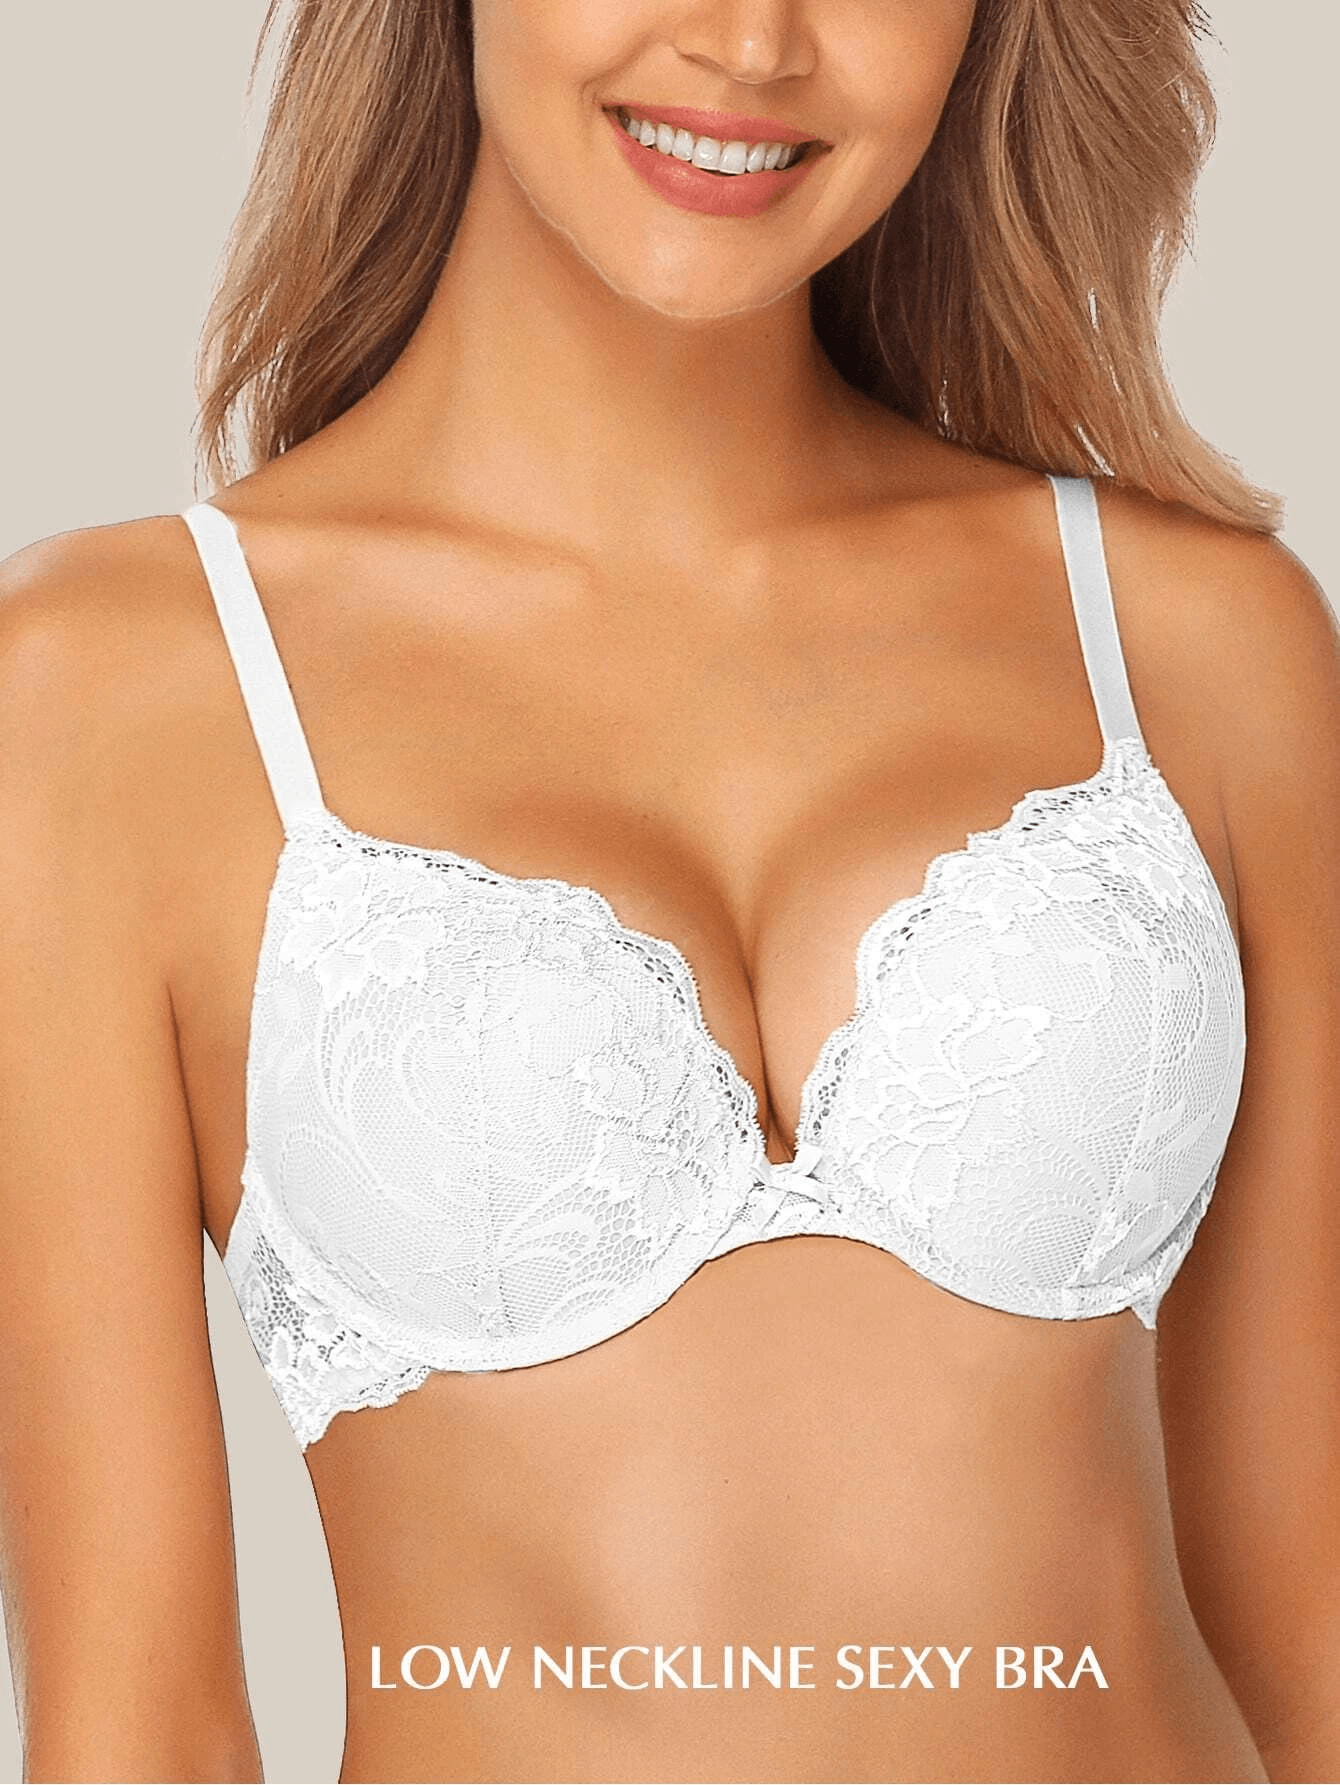 PUSH-UP BRAS. Sexy Lacy, Padded Bras. Free Shipping